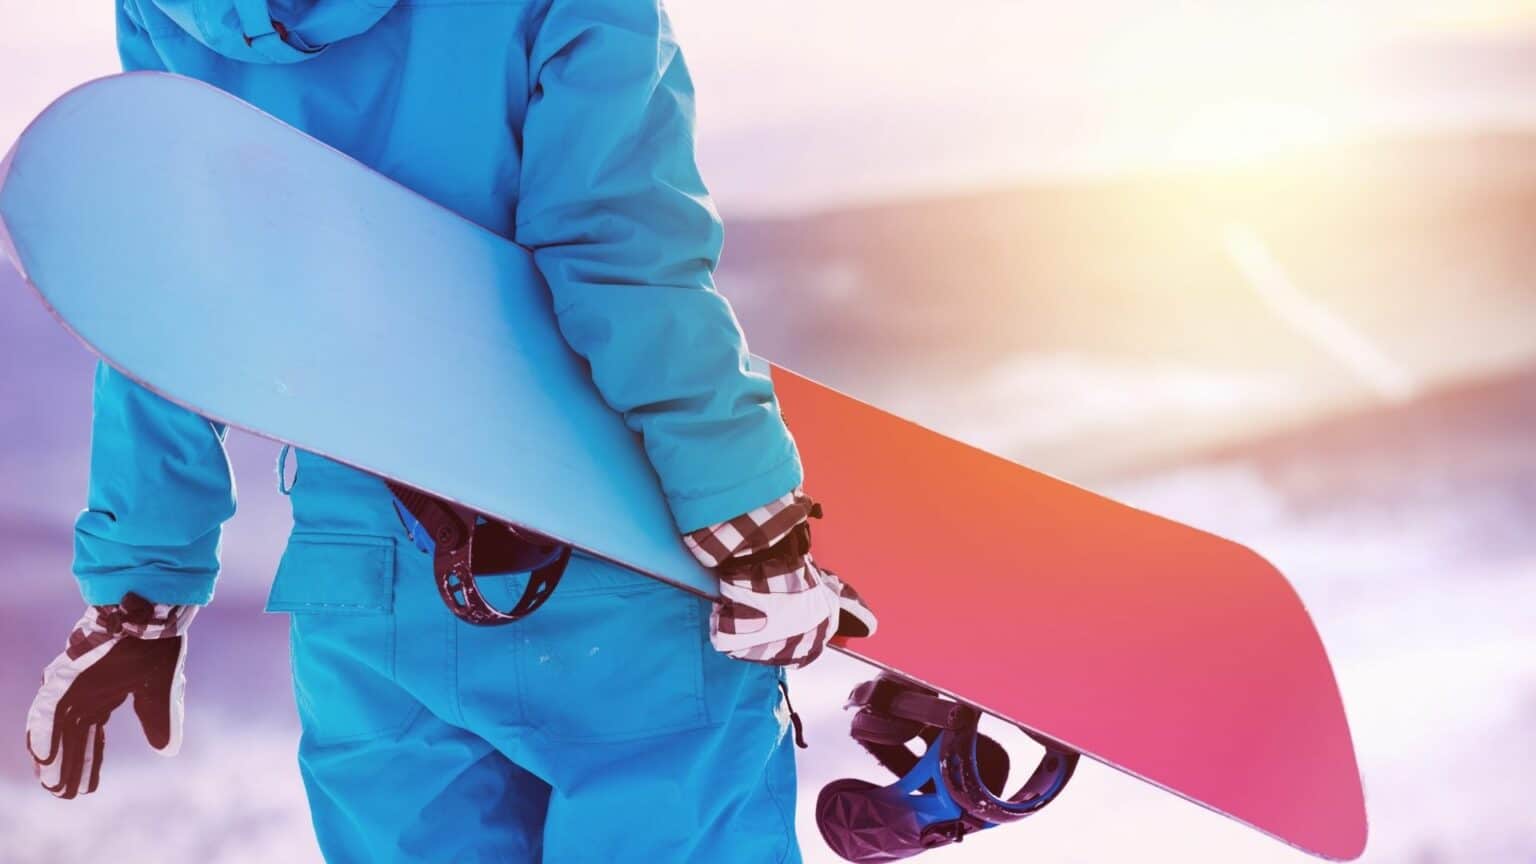 Types of snowboard designs